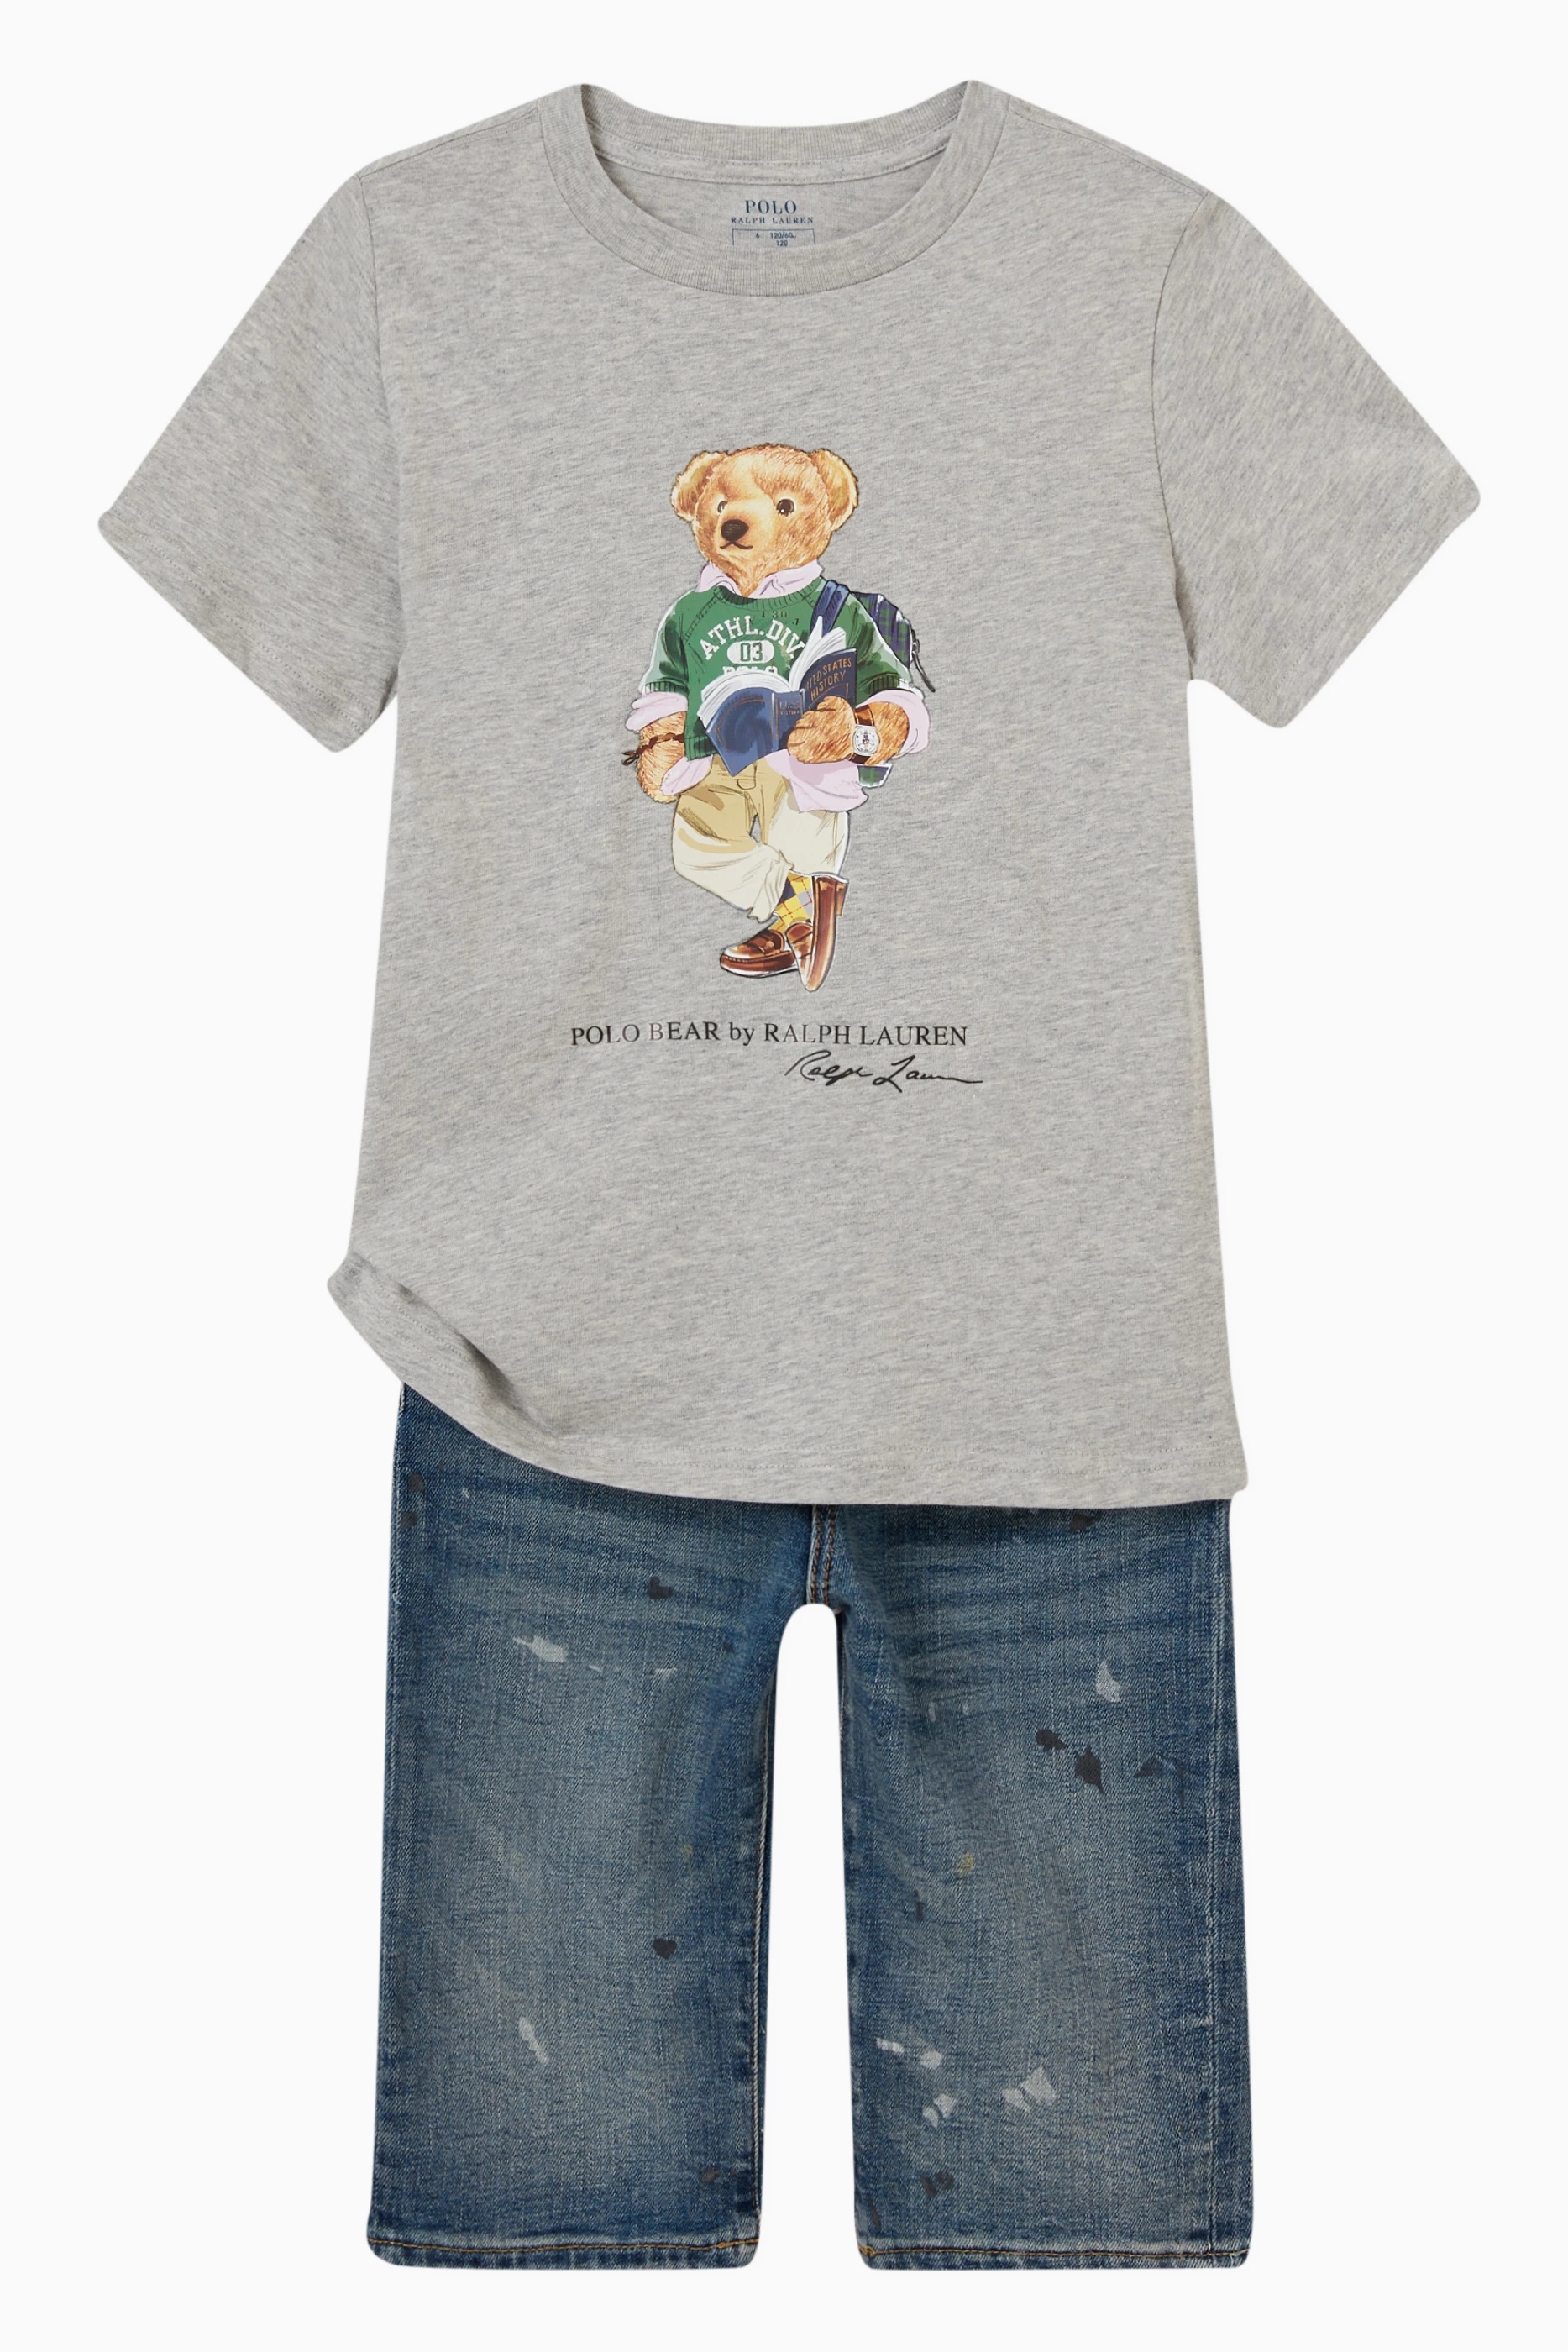  Small 'Teddy Bear' Adult Polo Shirt/T-Shirt (PL00037705) White  : Clothing, Shoes & Jewelry